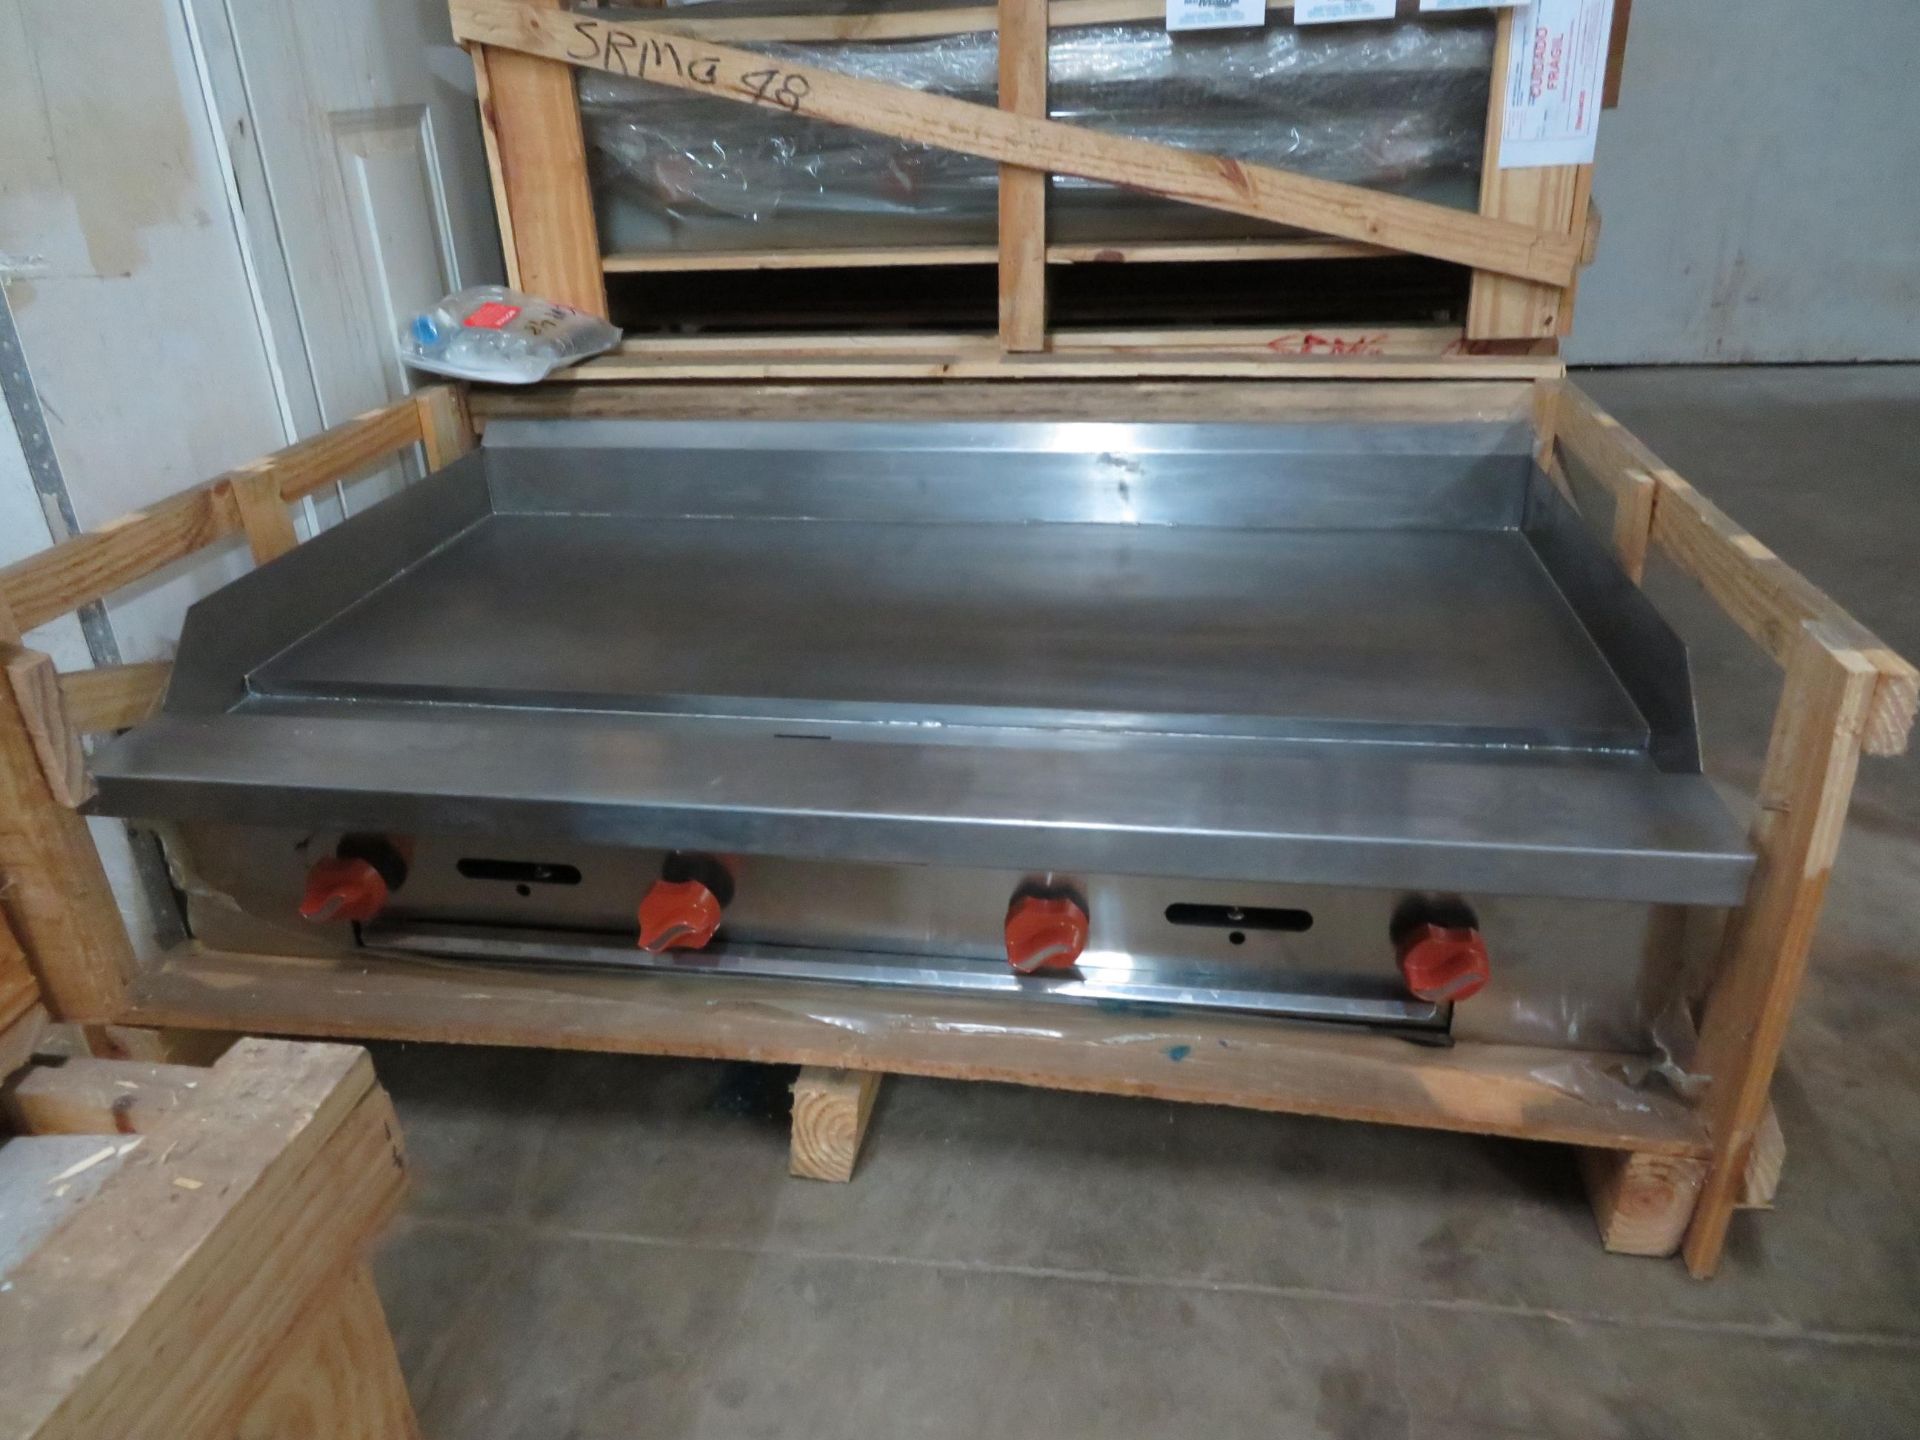 Brand New SIERRA 48" hot plate/griddle Mod #SRMG-48 (natural gas) approx. 48"w x 30"d x 9"h - Image 2 of 2